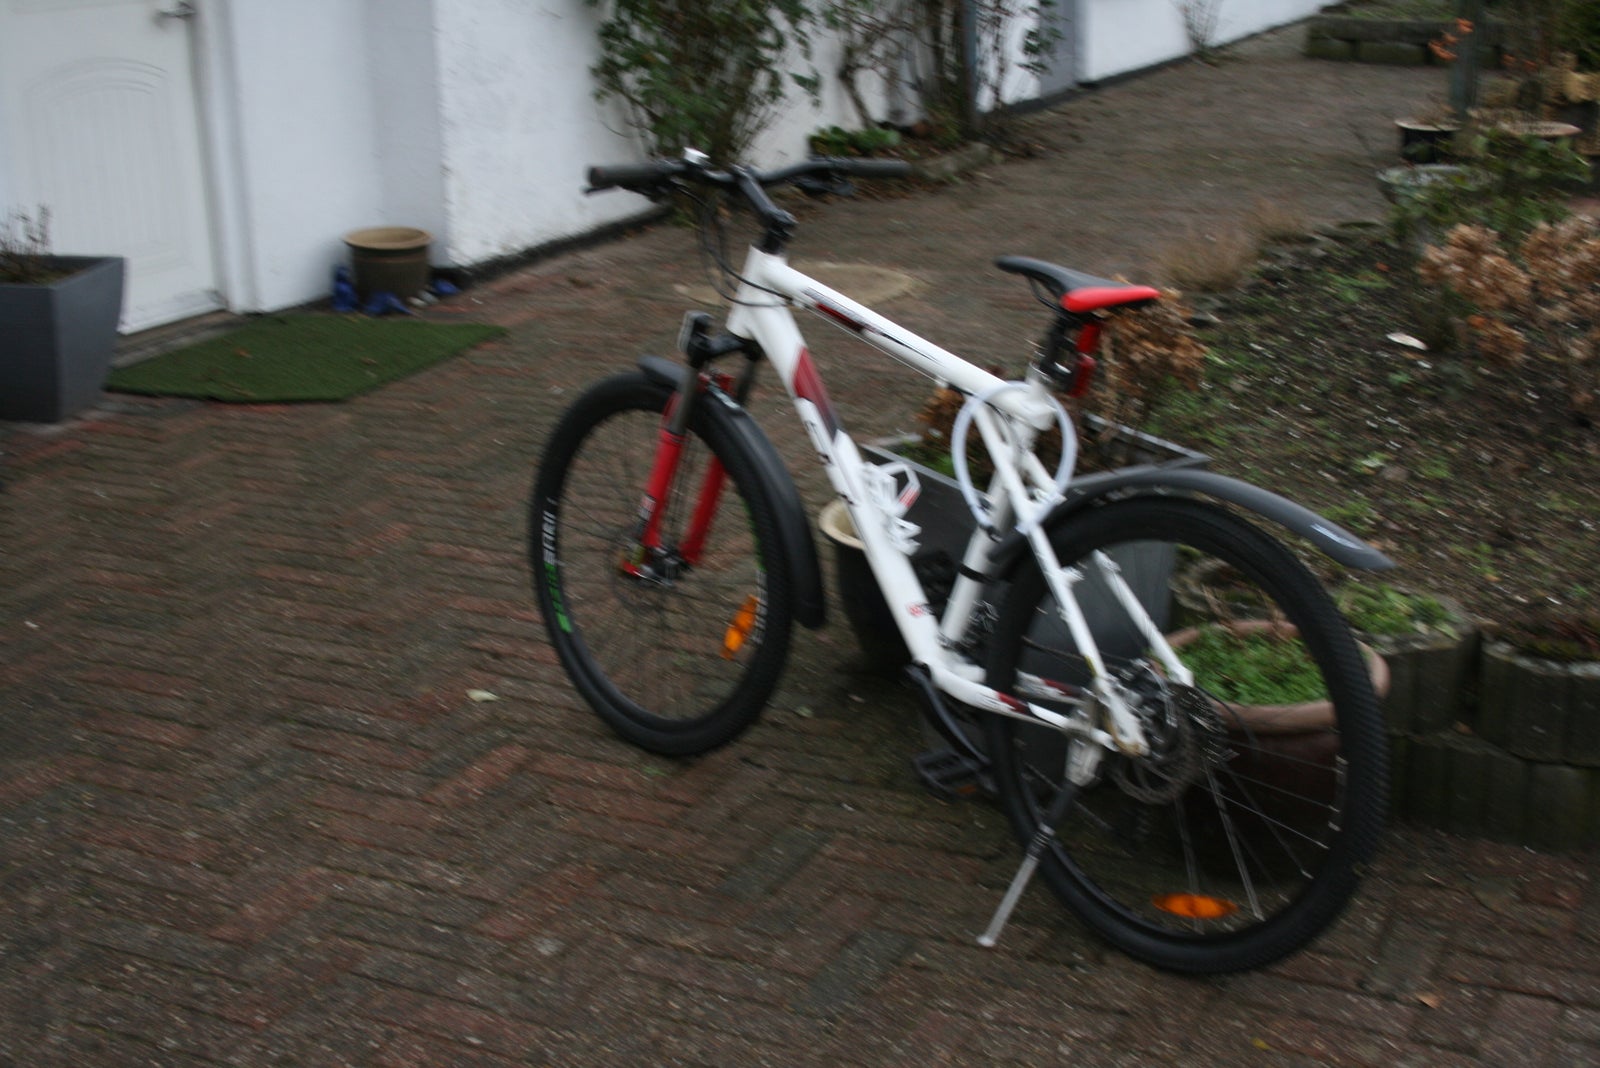 GT, anden mountainbike, 500 mm tommer